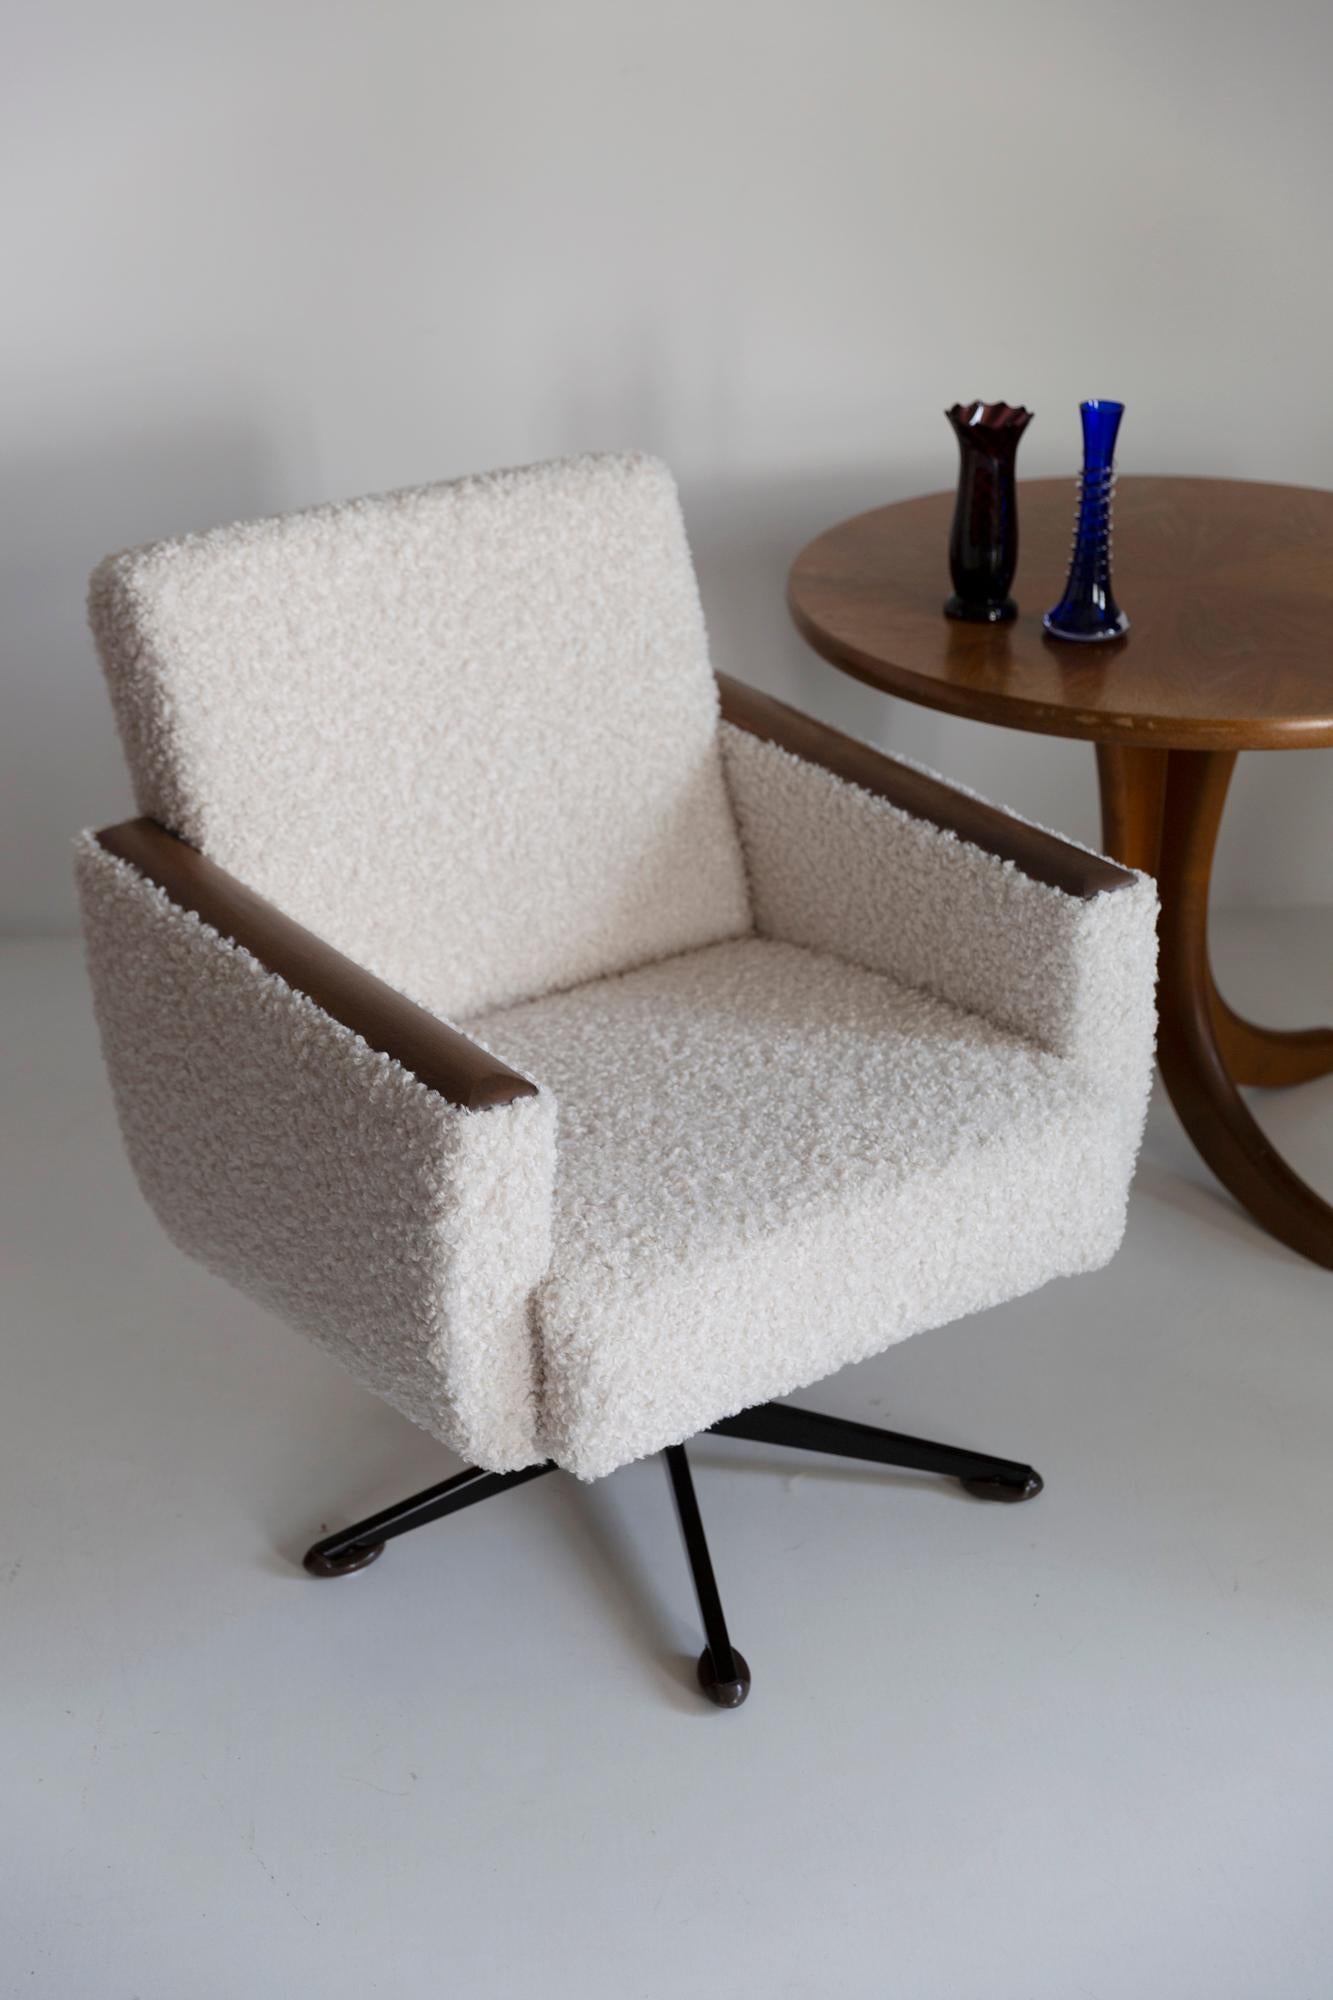 Pair of amazing swivel armchairs from the 1960s, produced in the Silesian furniture factory in Swiebodzin - at the moment they are unique. Very comfortable. Due to their dimensions, they perfectly blend in even in small apartments providing comfort